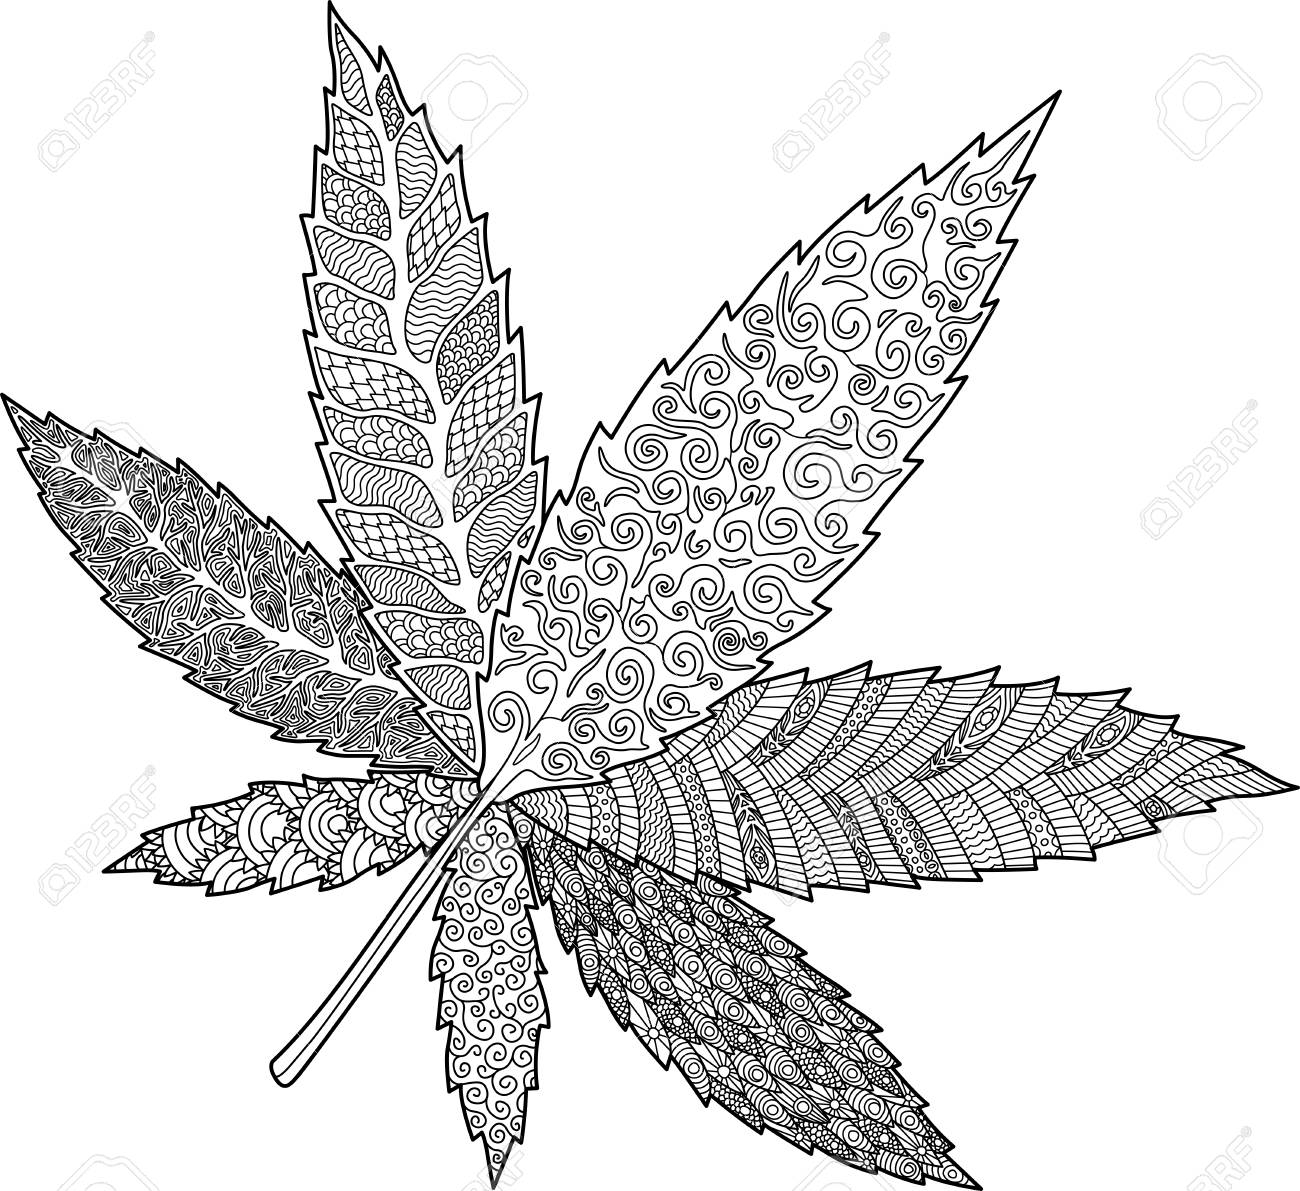 Adult coloring book page with decorative cannabis leaf on white background stock photo picture and royalty free image image